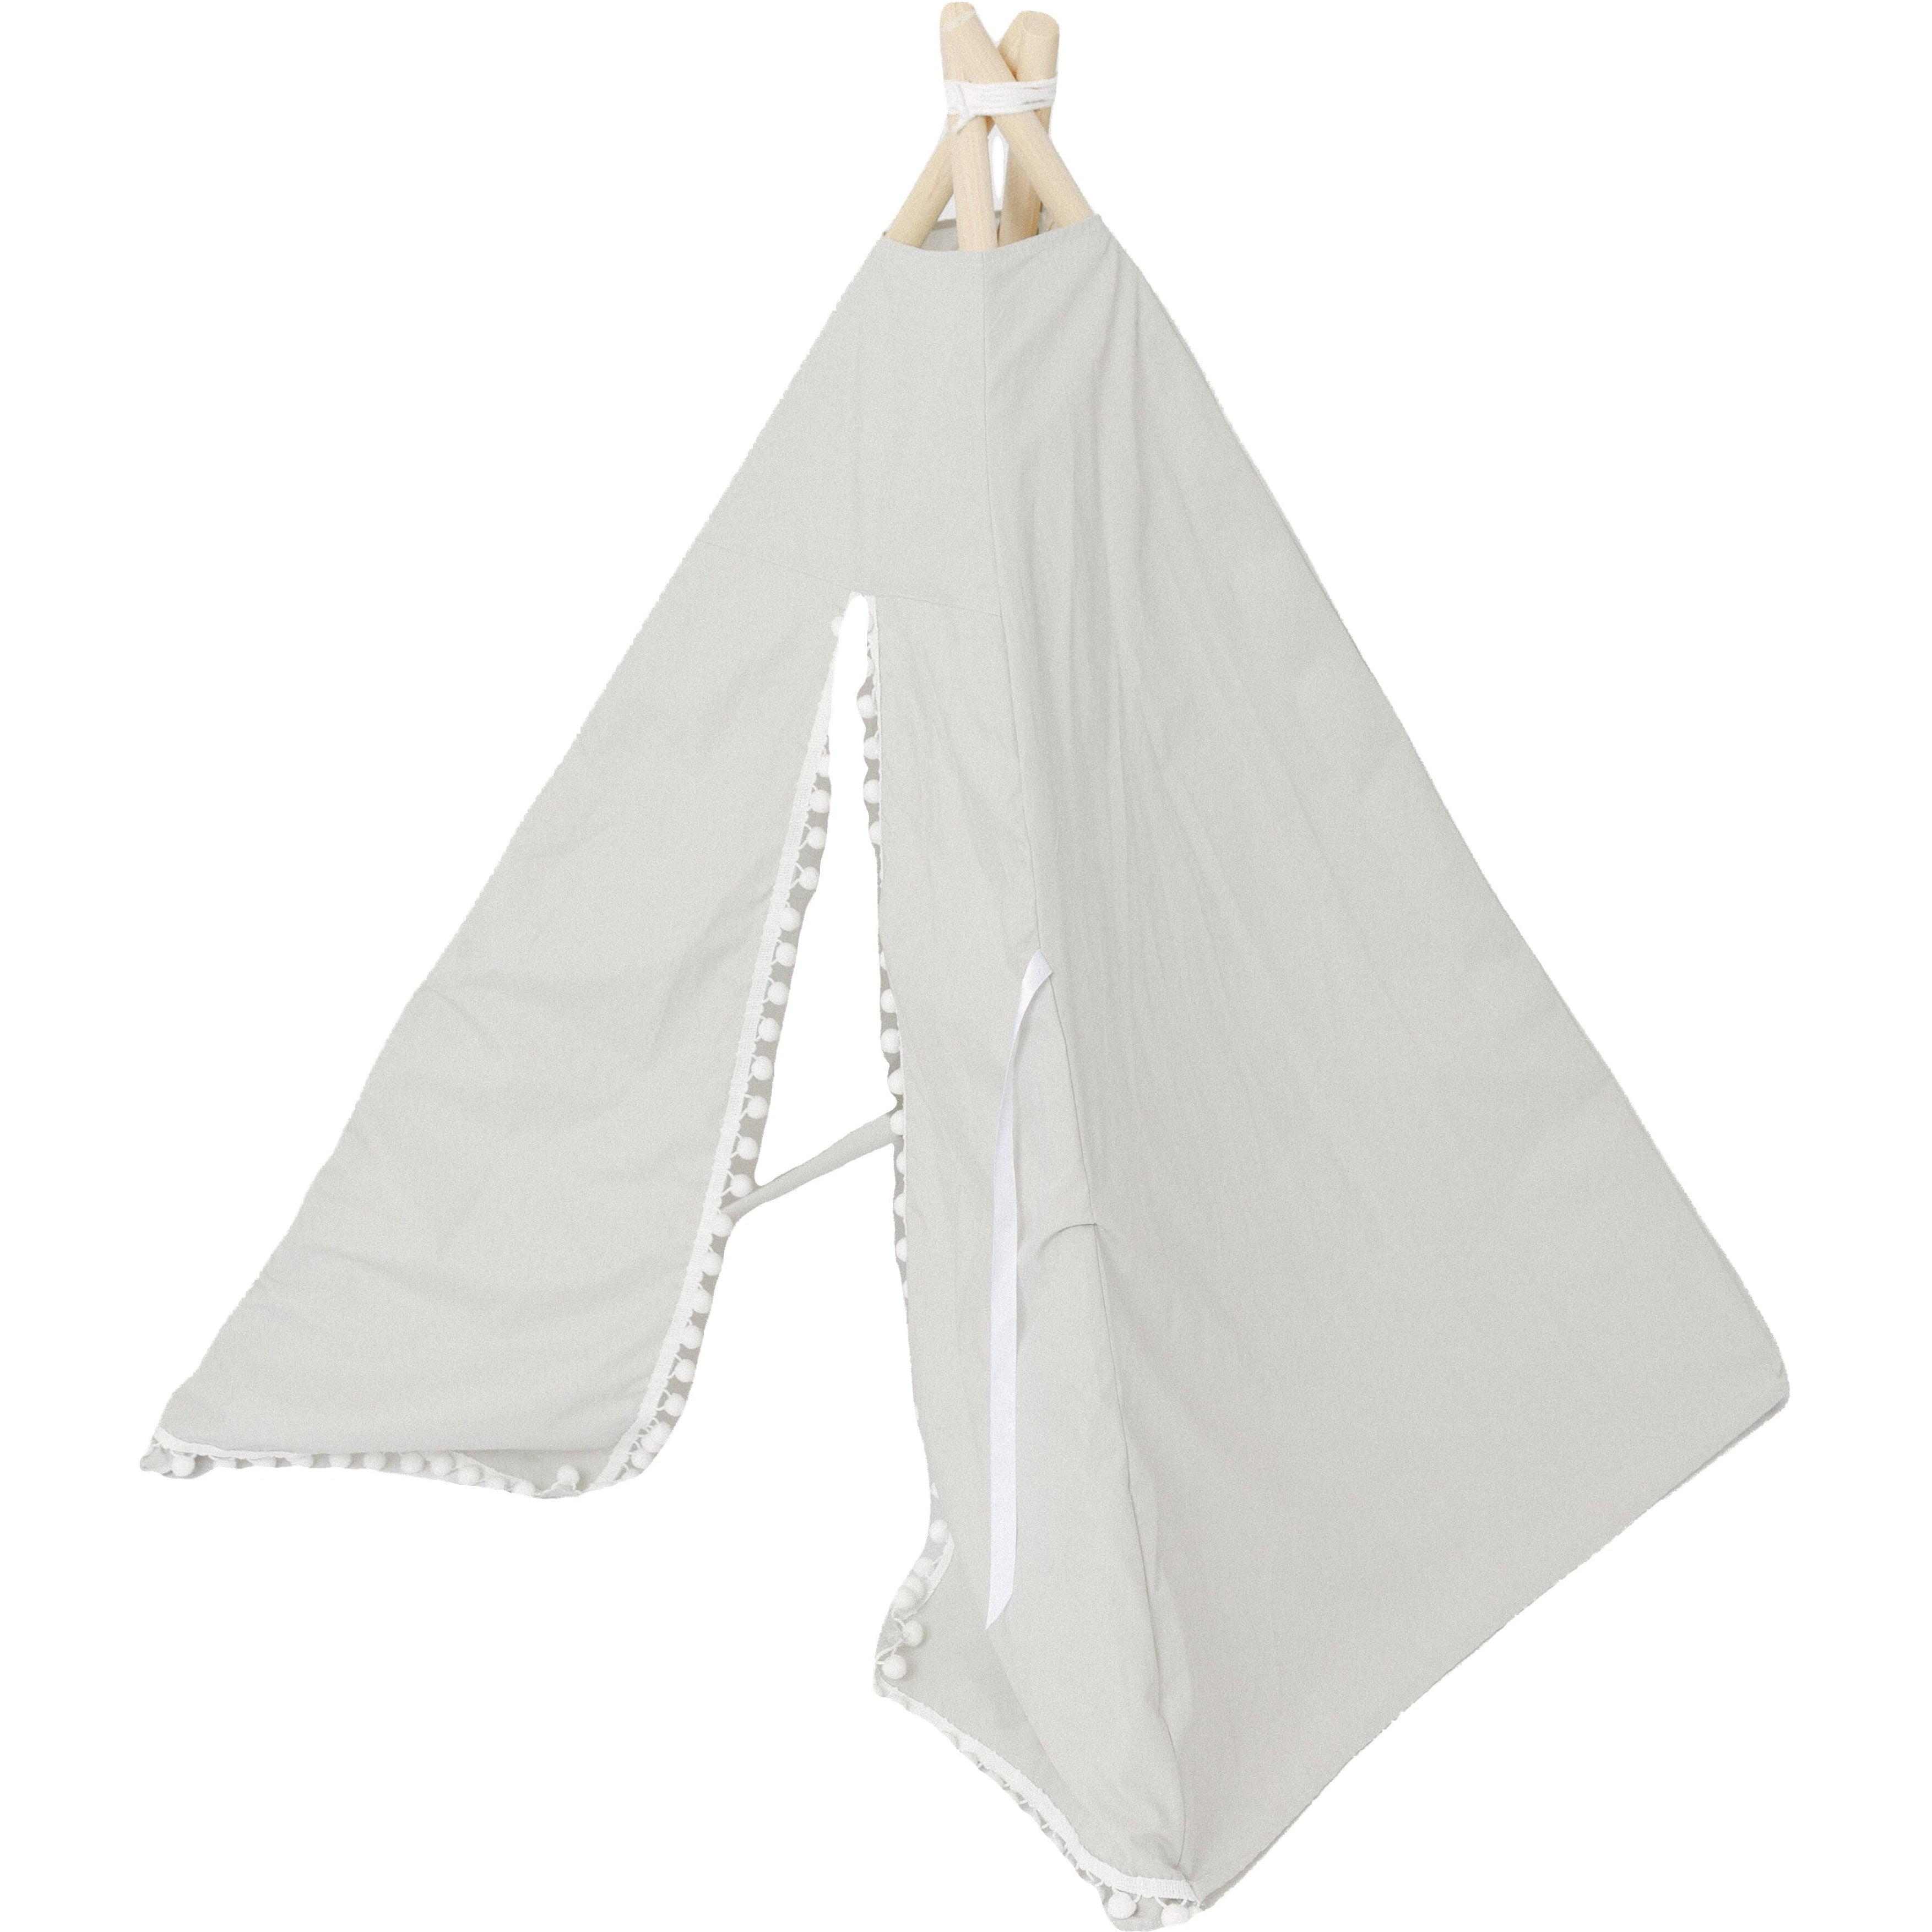 The Gray Itty Bitty Play Tent